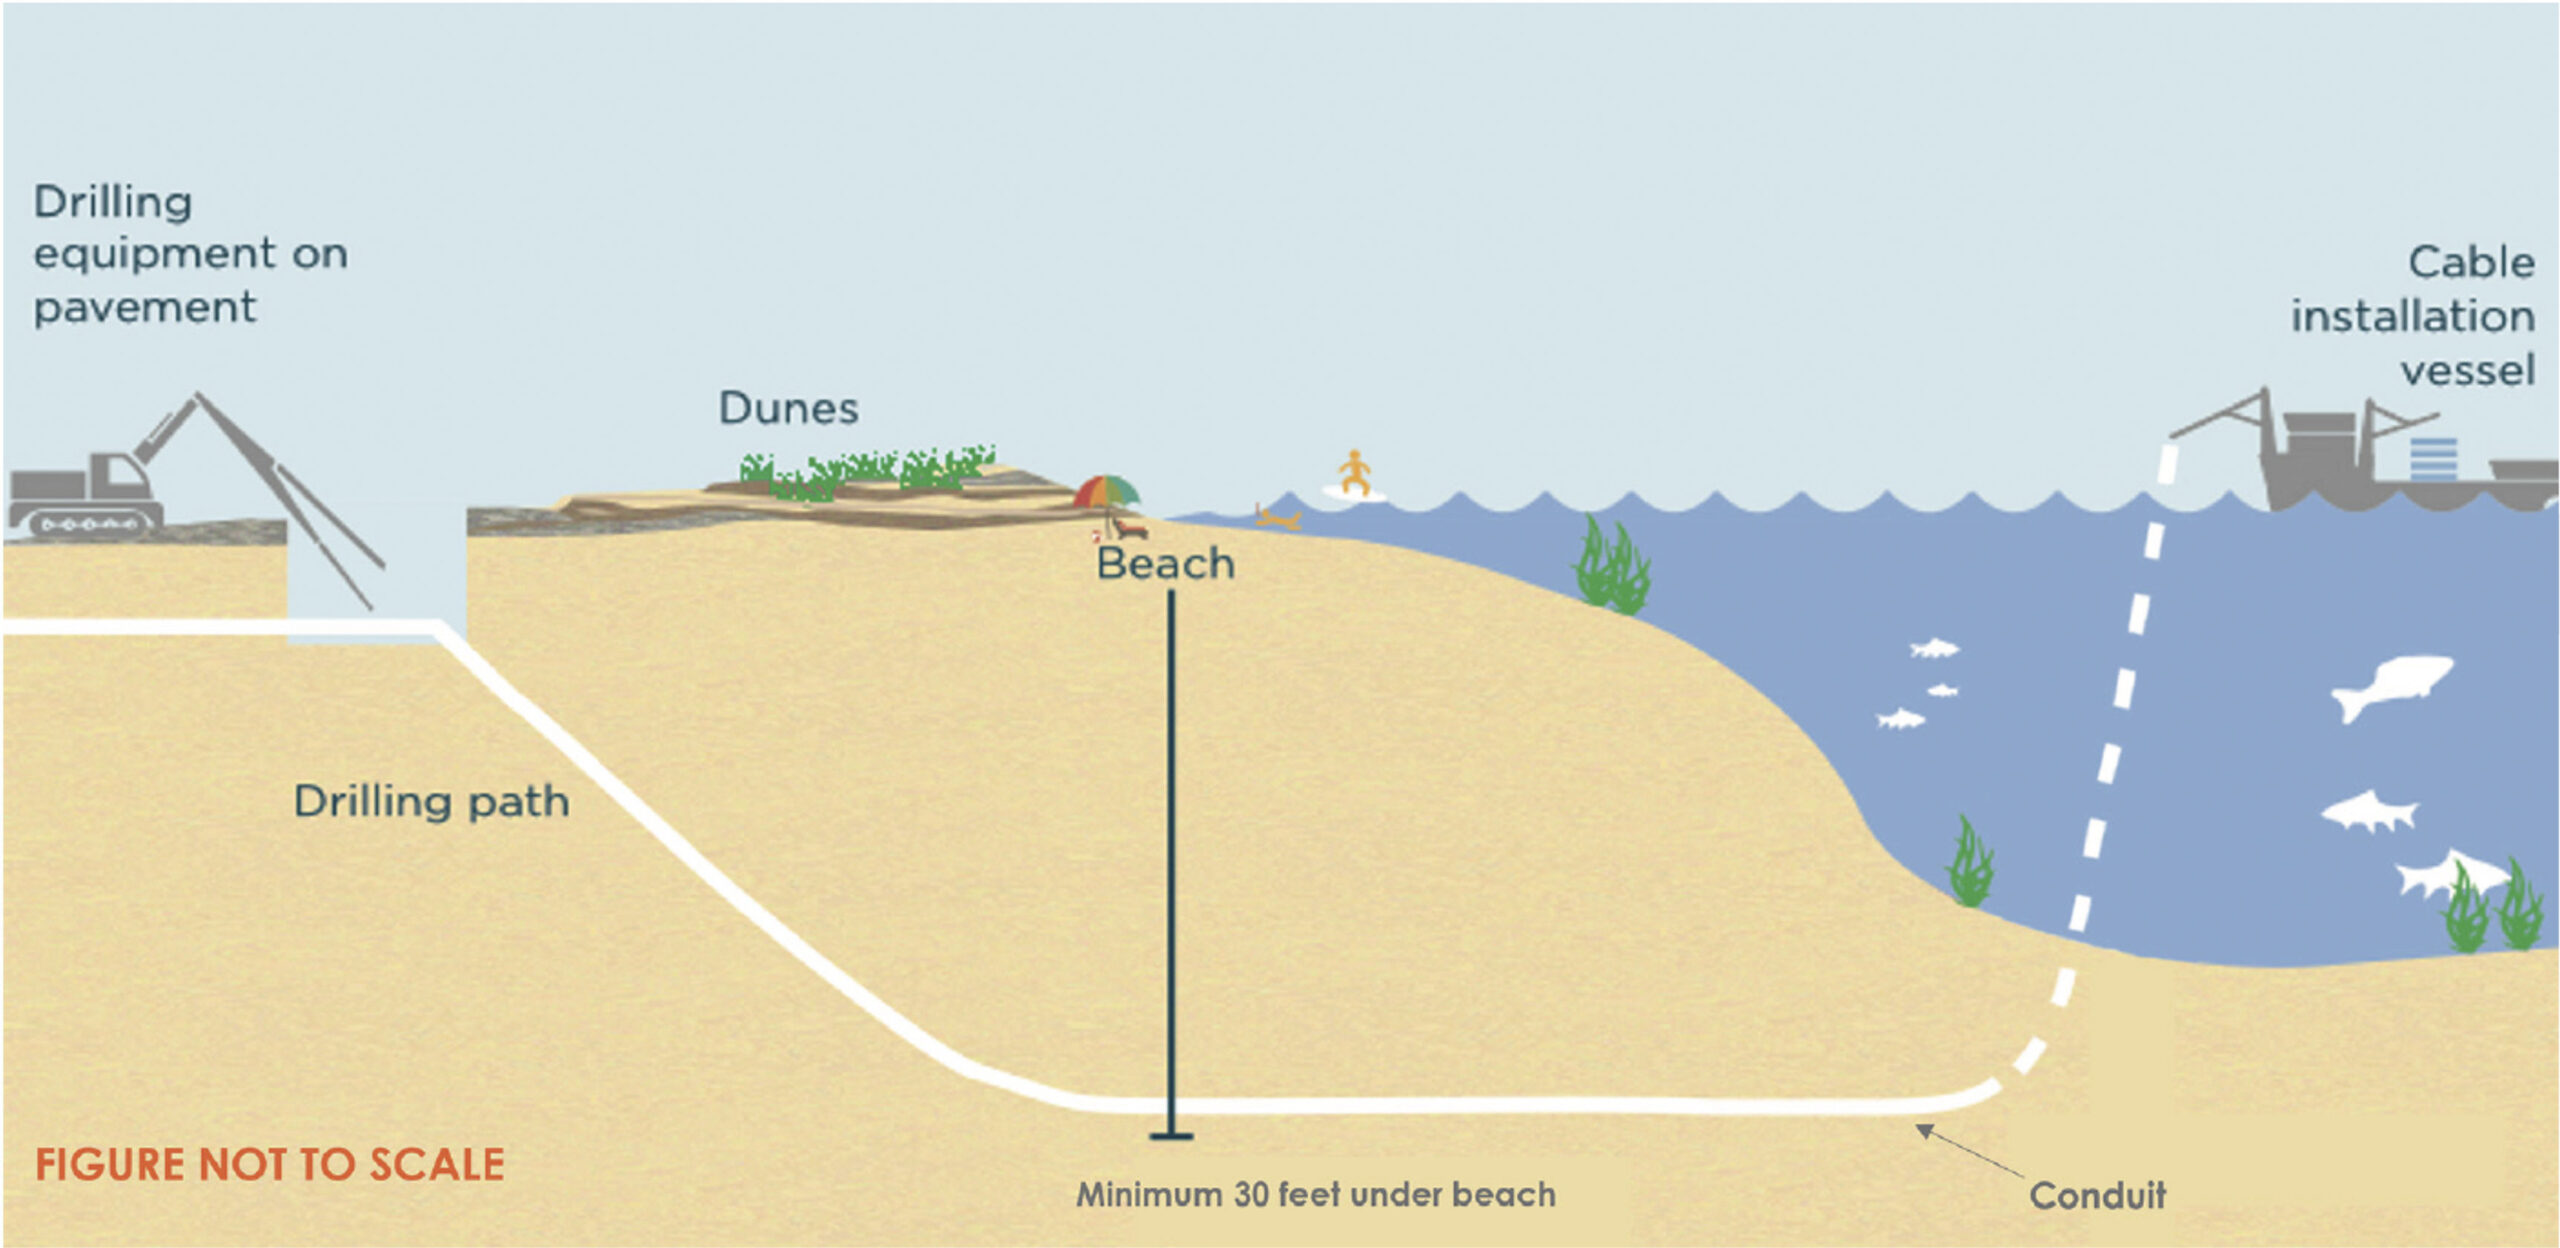 Graphics from the upcoming virtual open house on the next phase of the South Fork Wind power cable installation, showing how the horizontal drilling of the conduit that will connect to the offshore cable will be installed.